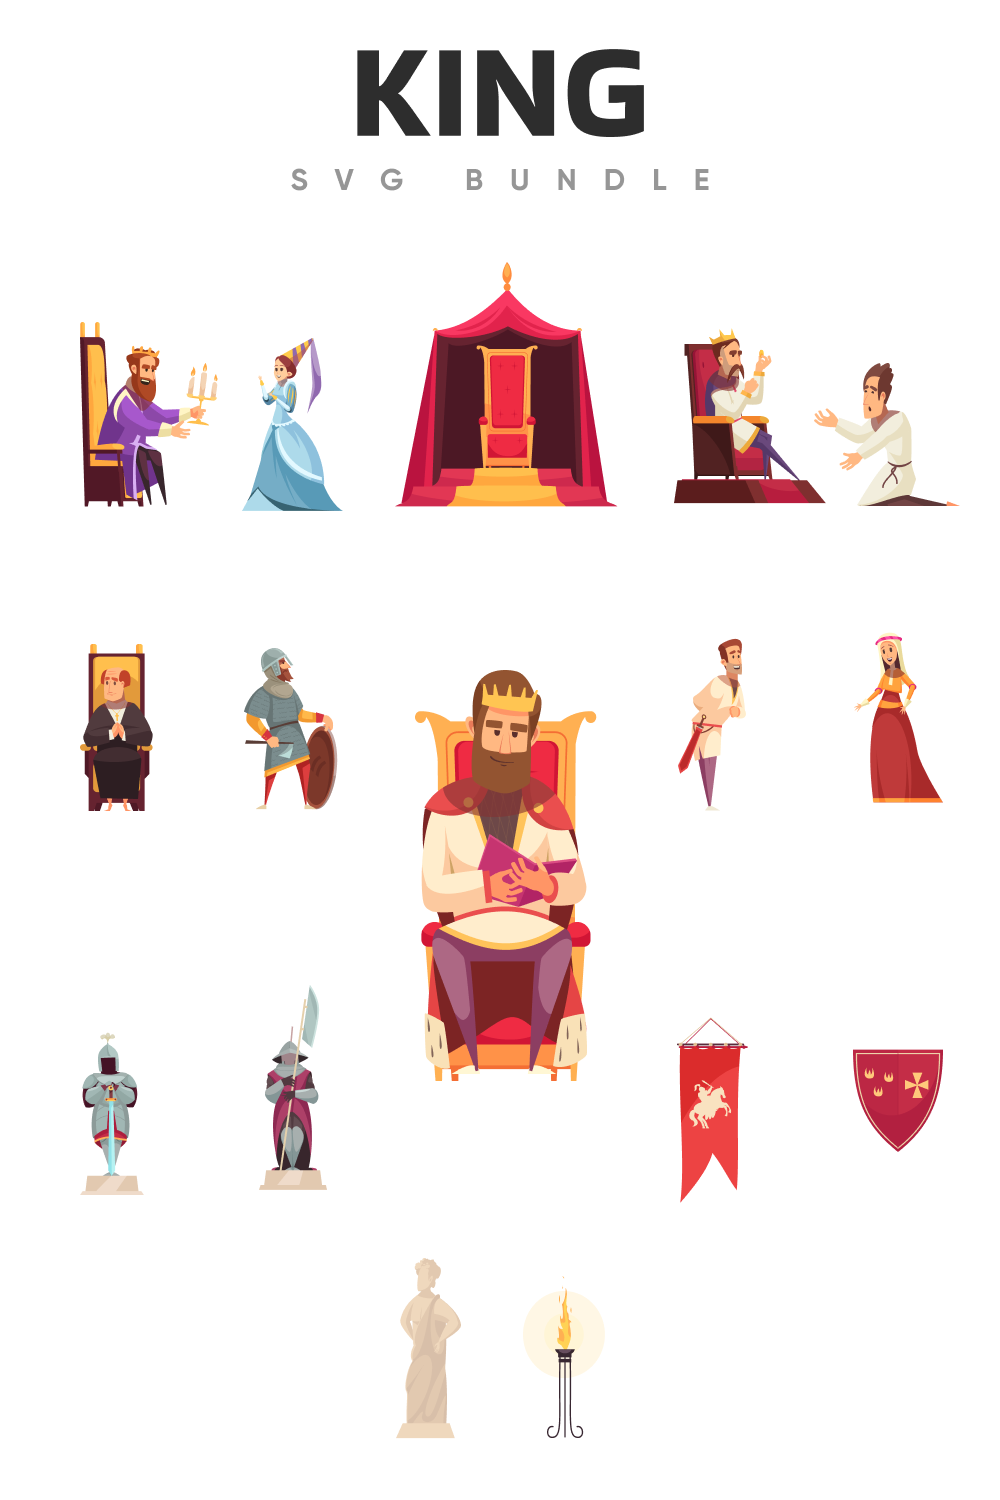 Some elements for the king illustration.